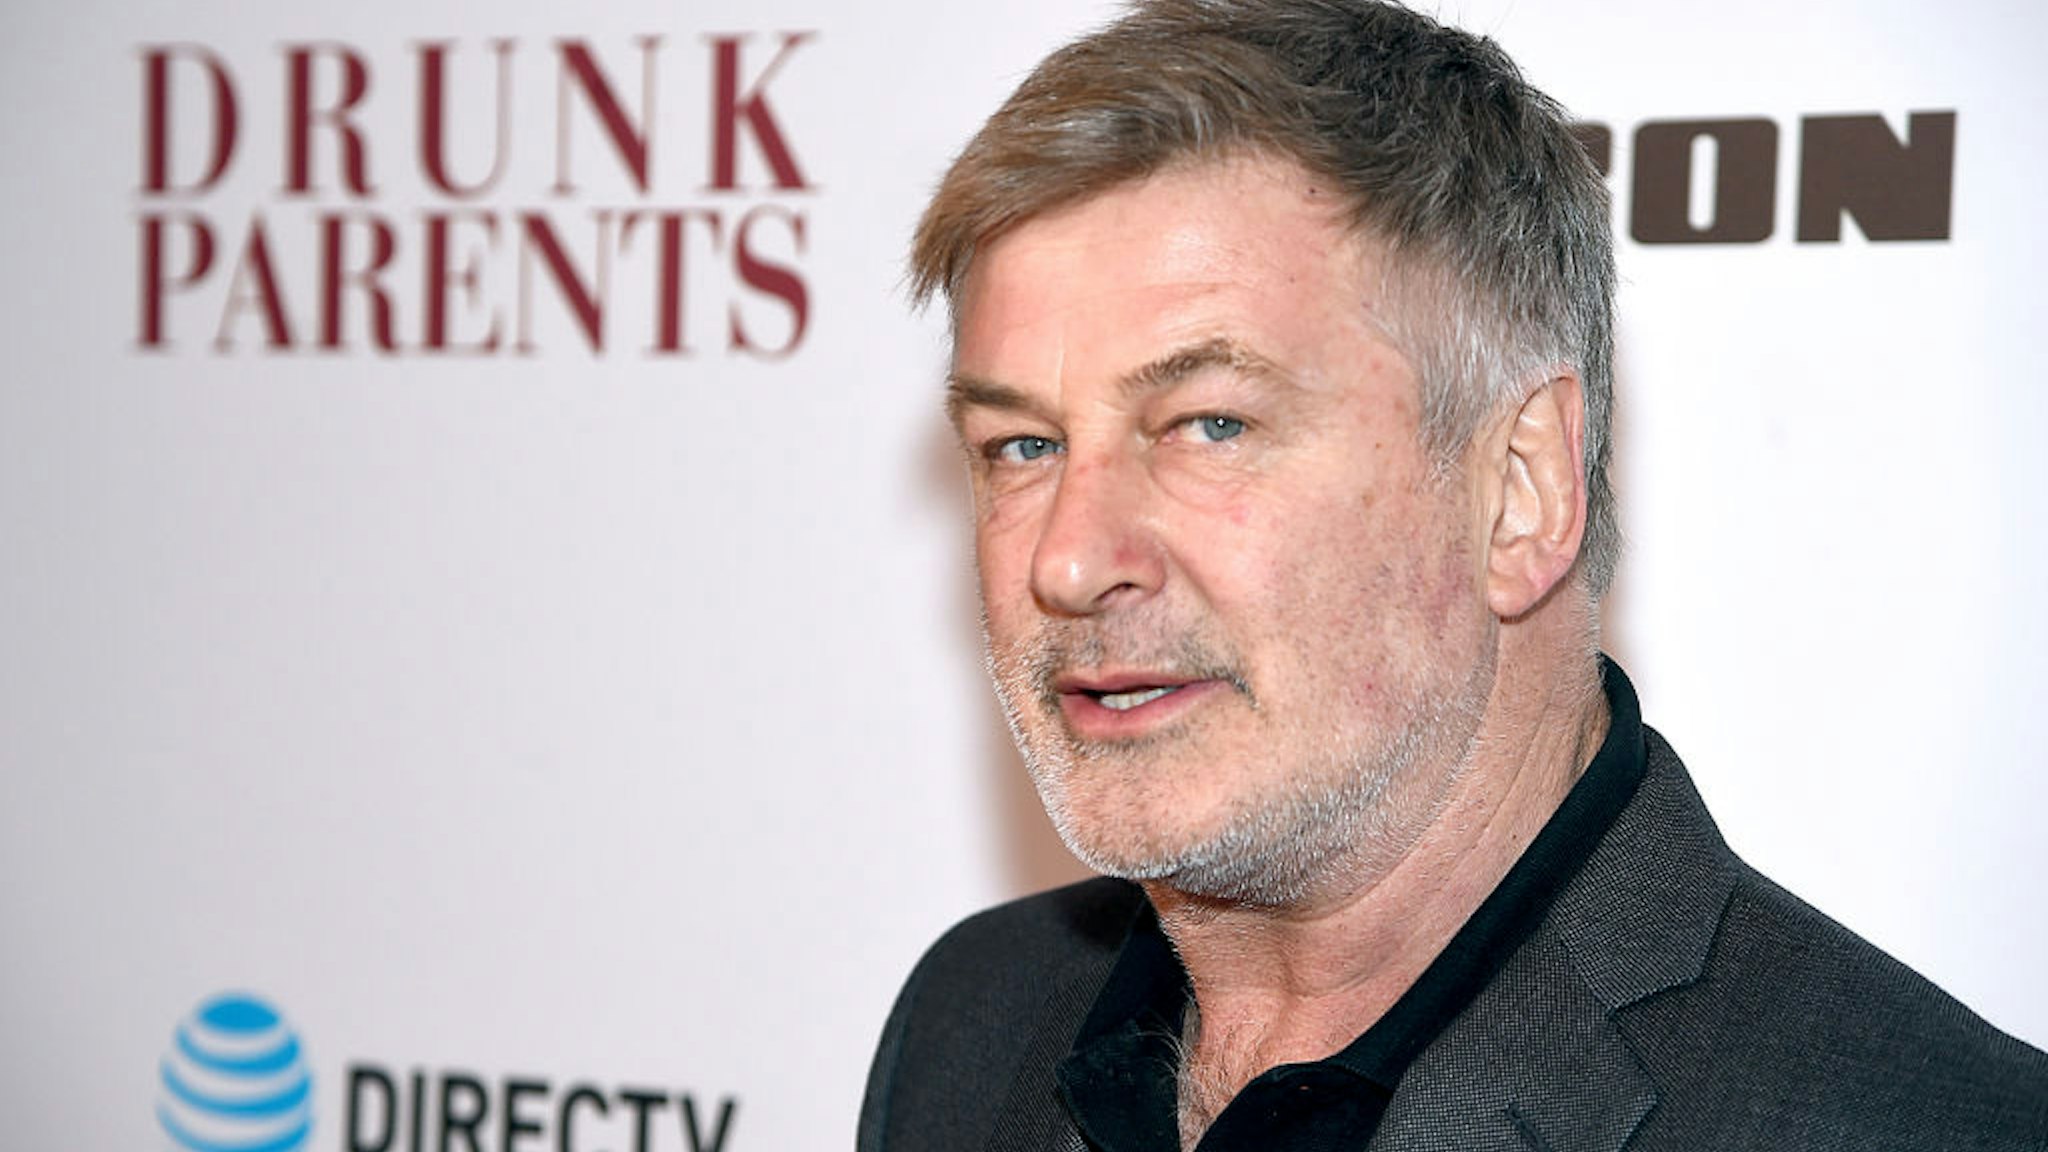 Alec Baldwin attends the "Drunk Parents" New York Premiere at Roxy Hotel on March 04, 2019 in New York City.